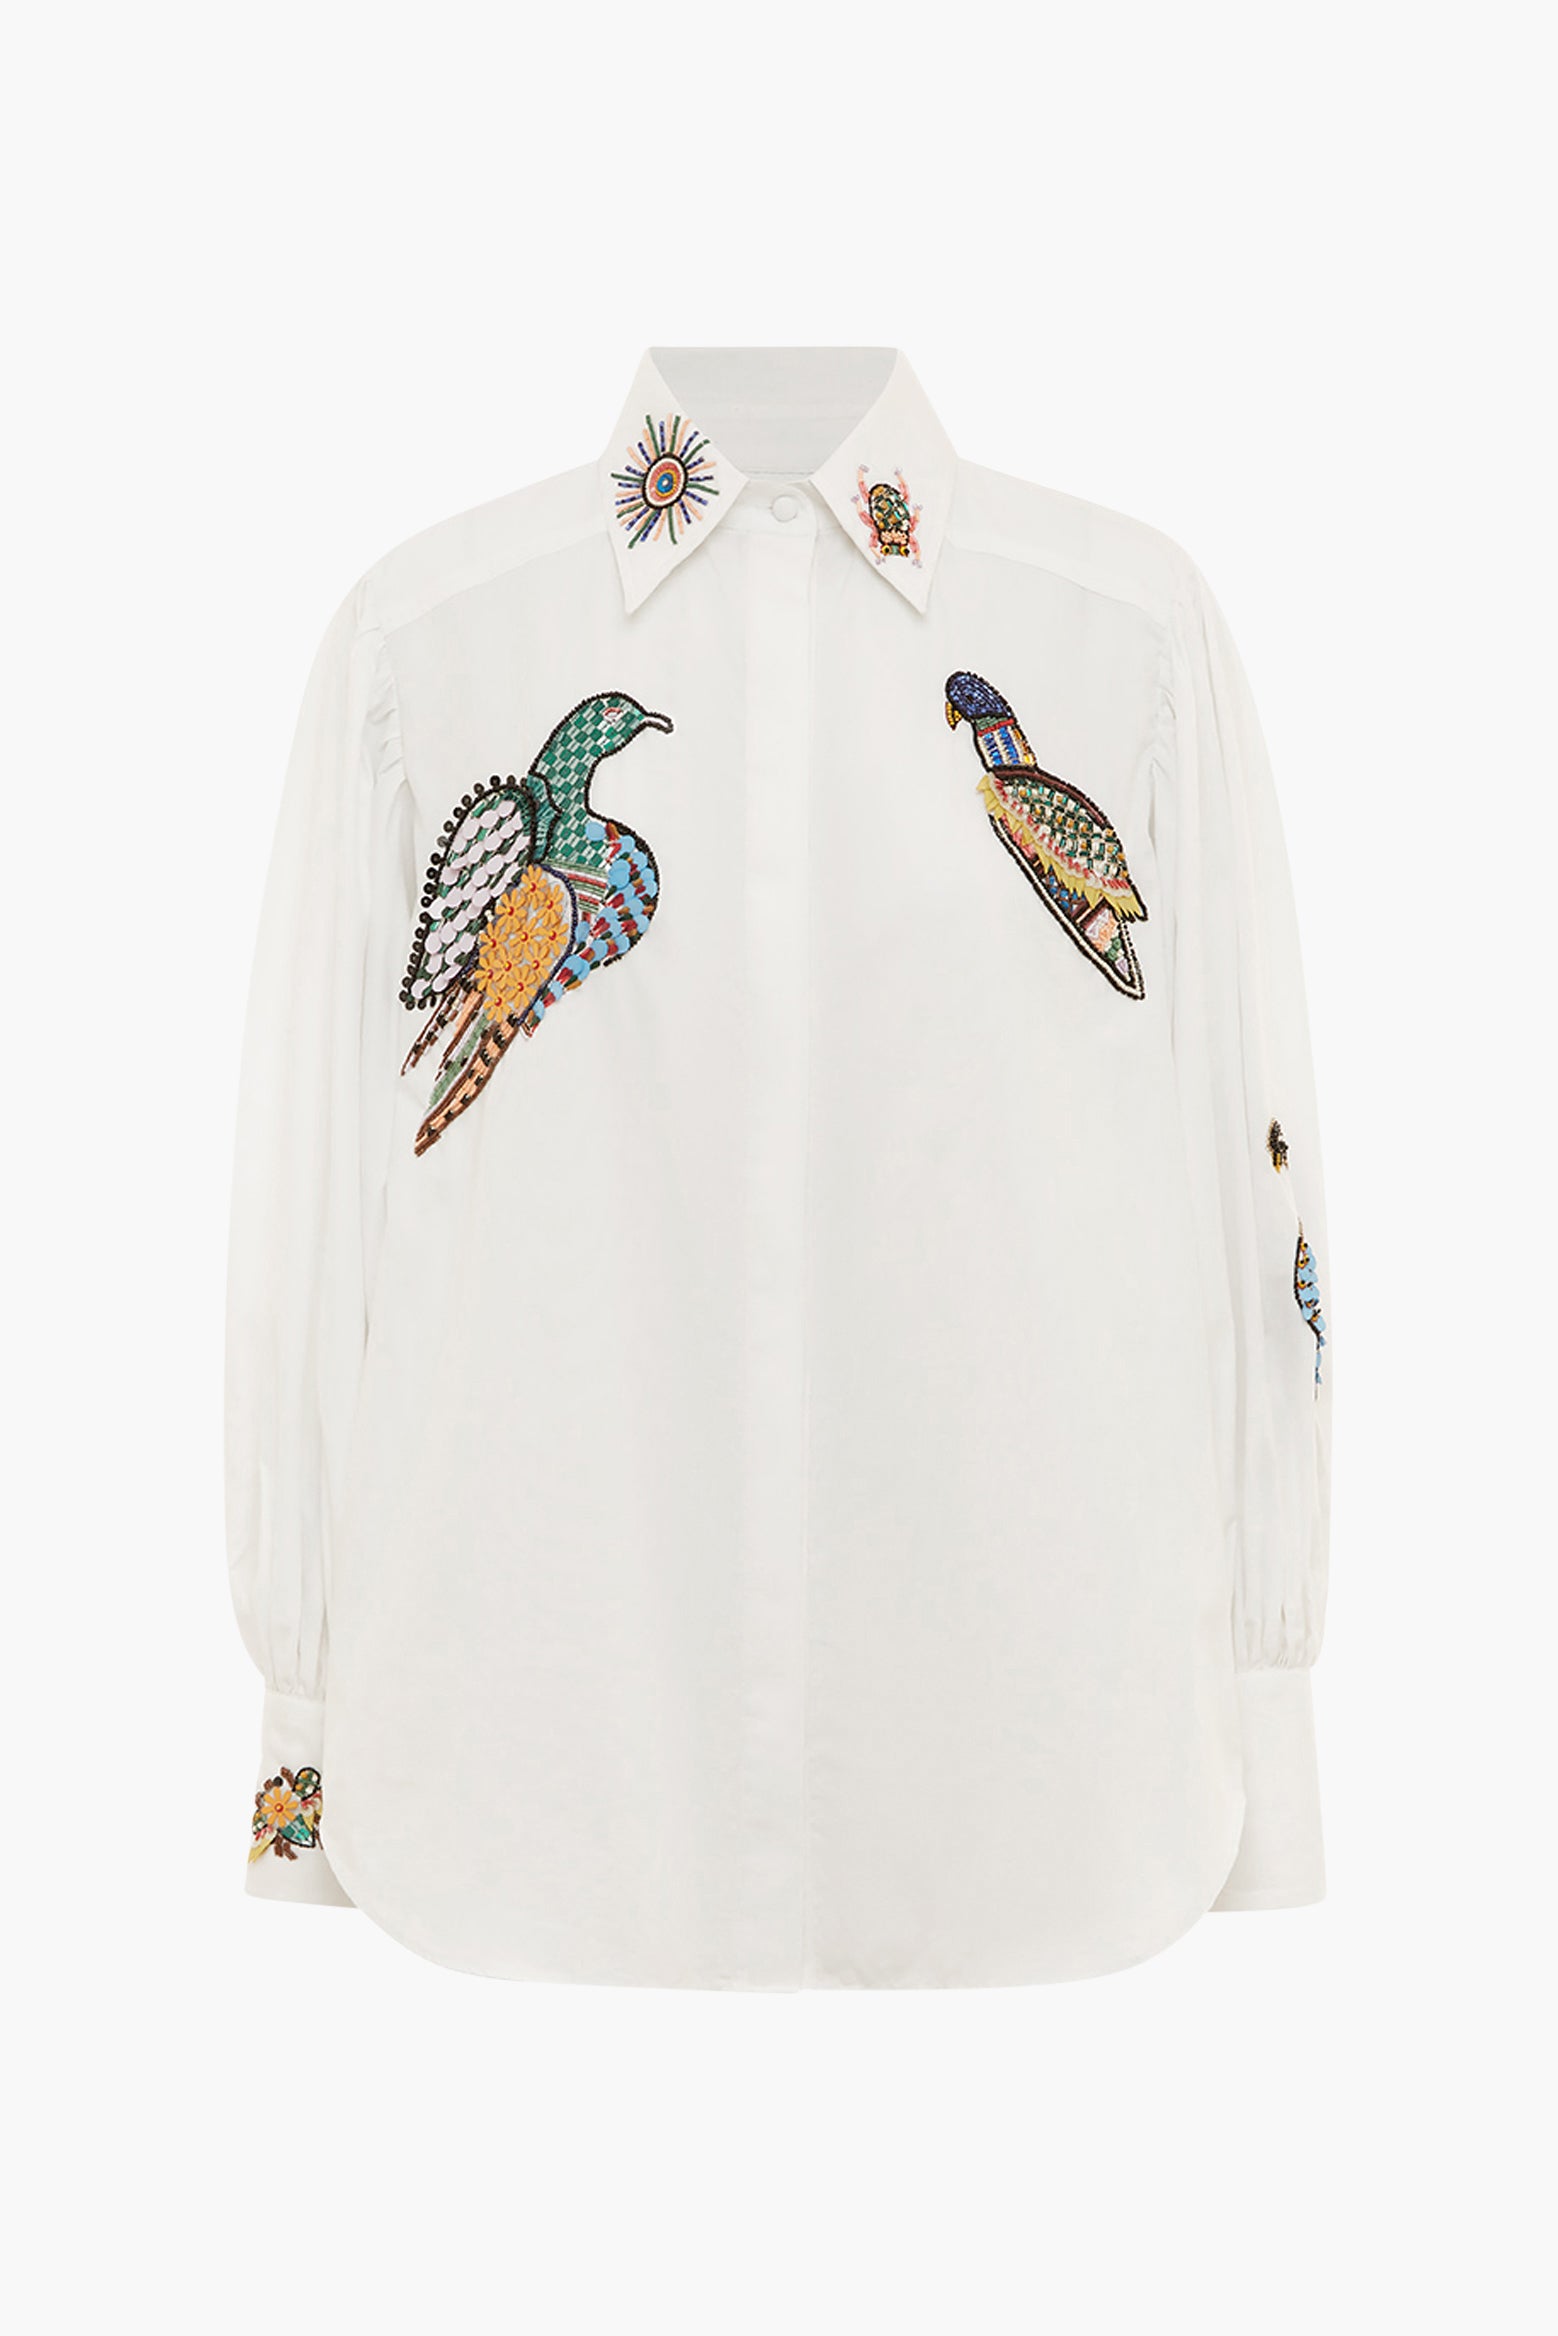 Alemais Rowena Beaded Shirt in Ivory available at TNT The New Trend Australia.